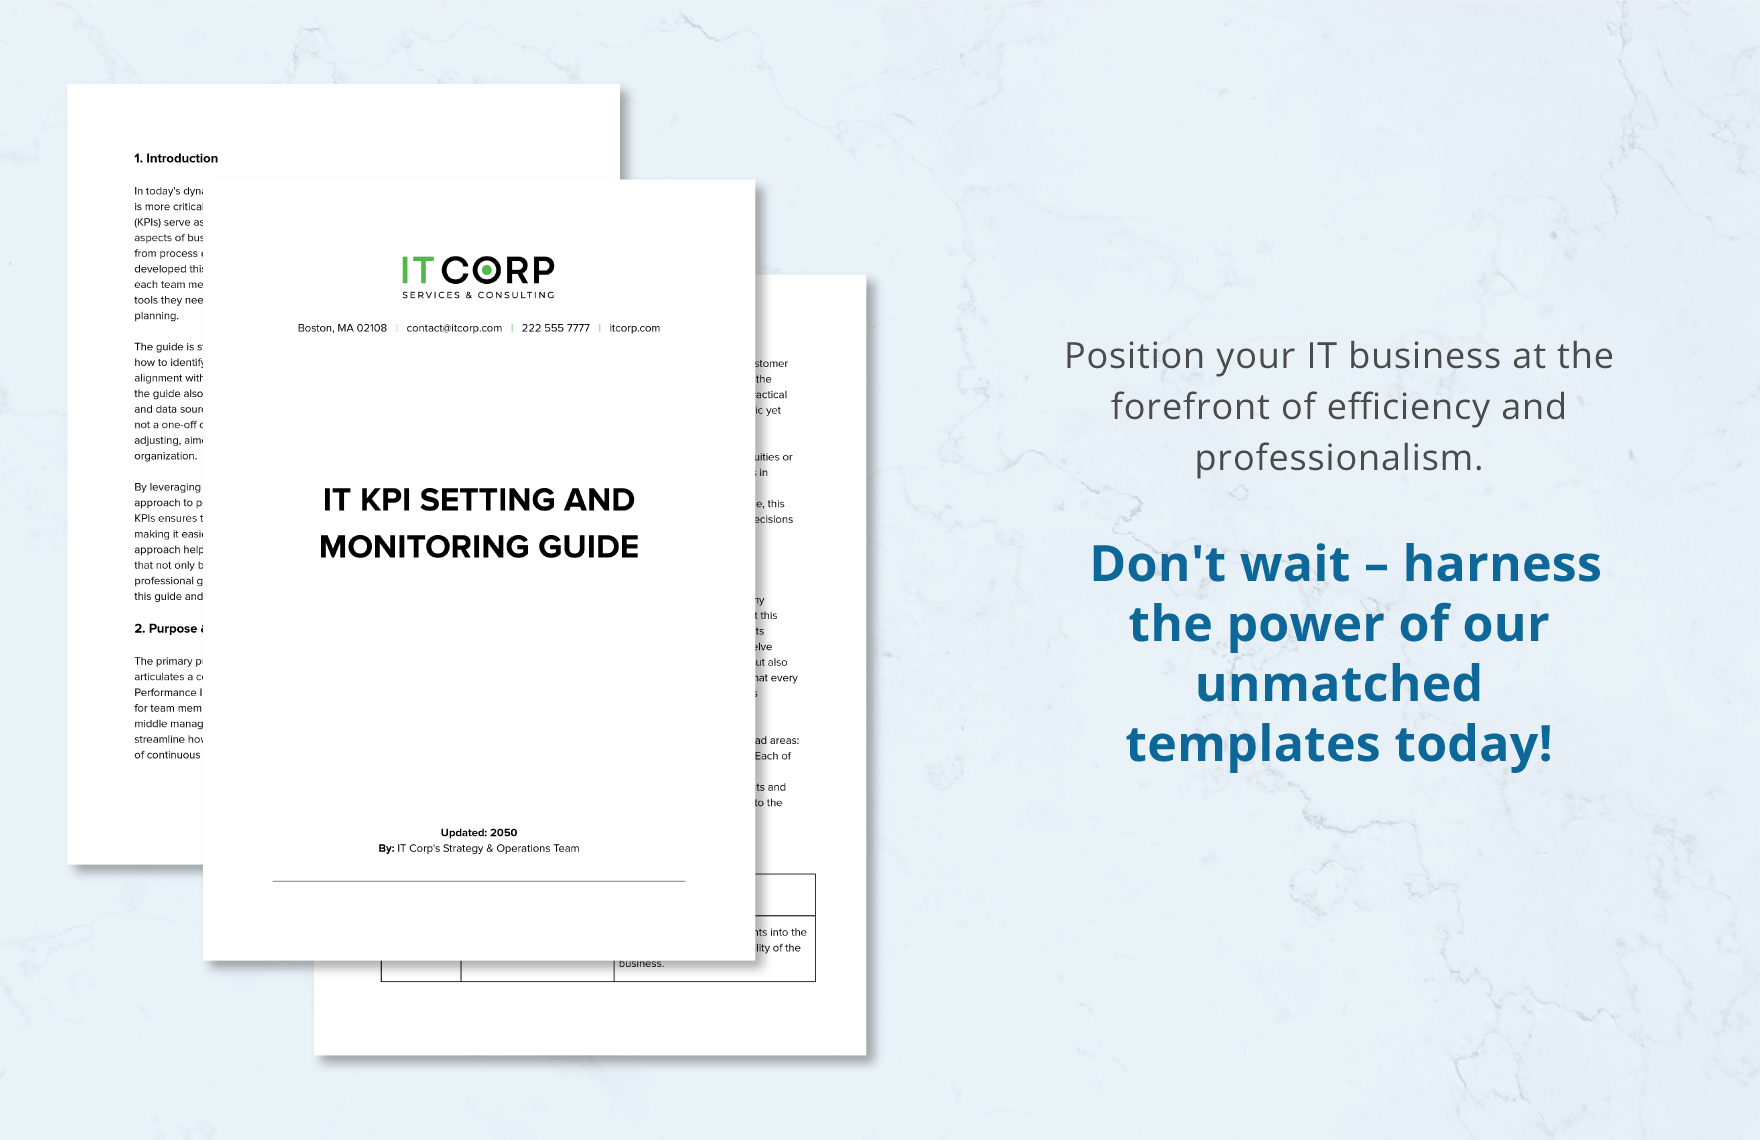 IT KPI Setting and Monitoring Guide Template